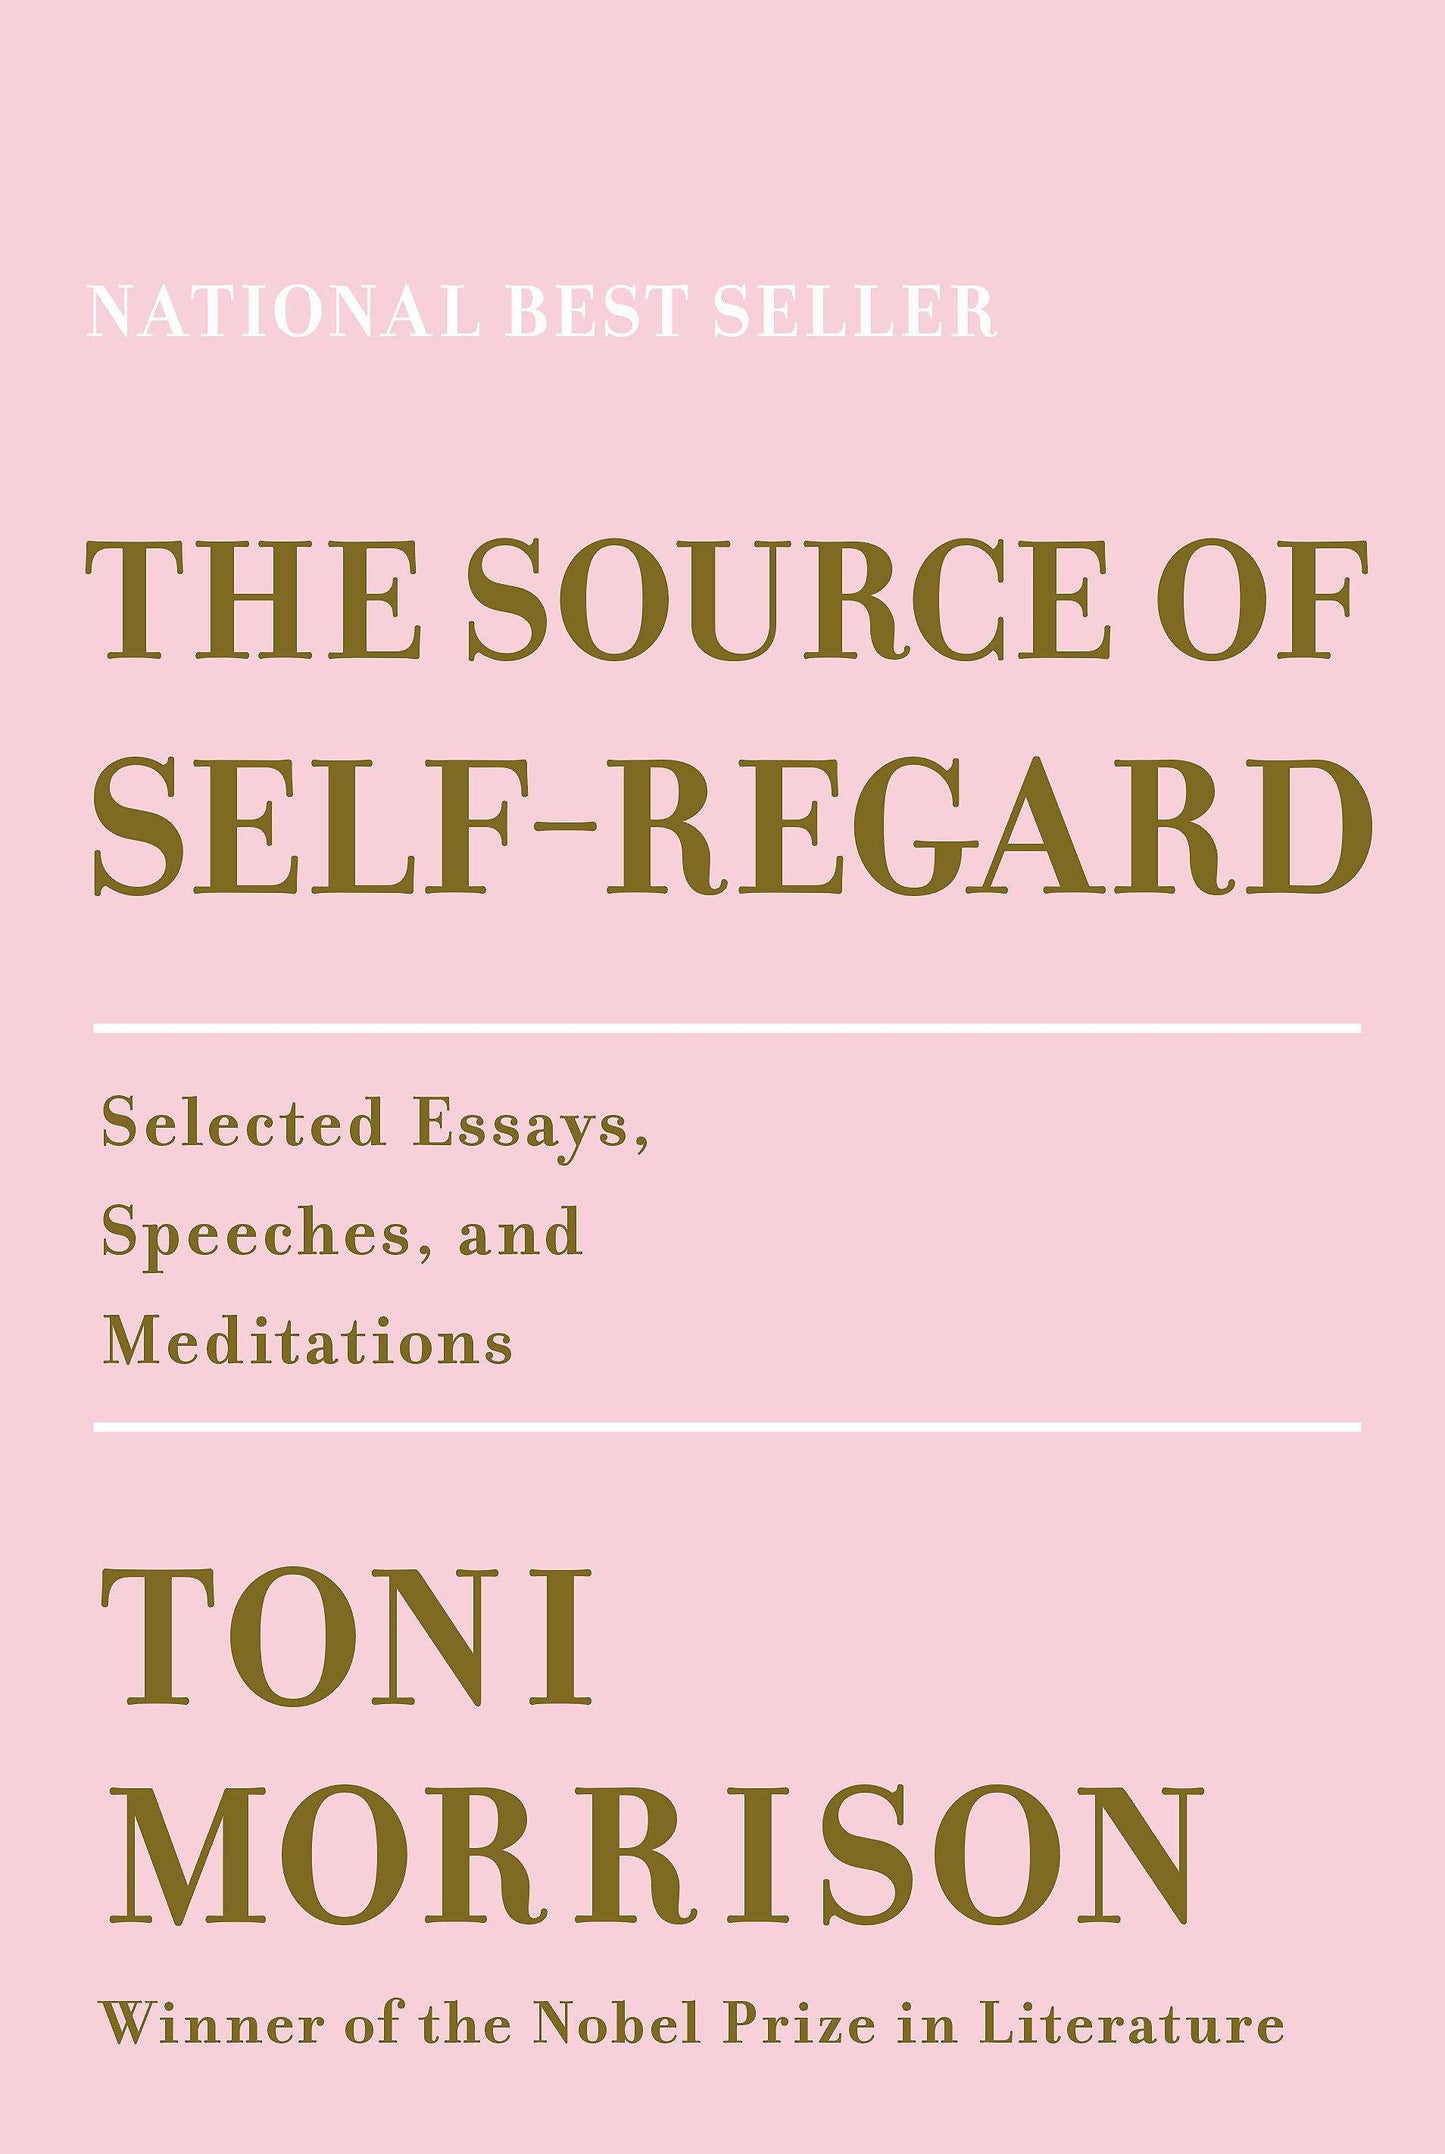 The Source of Self-Regard // Selected Essays, Speeches, and Meditations